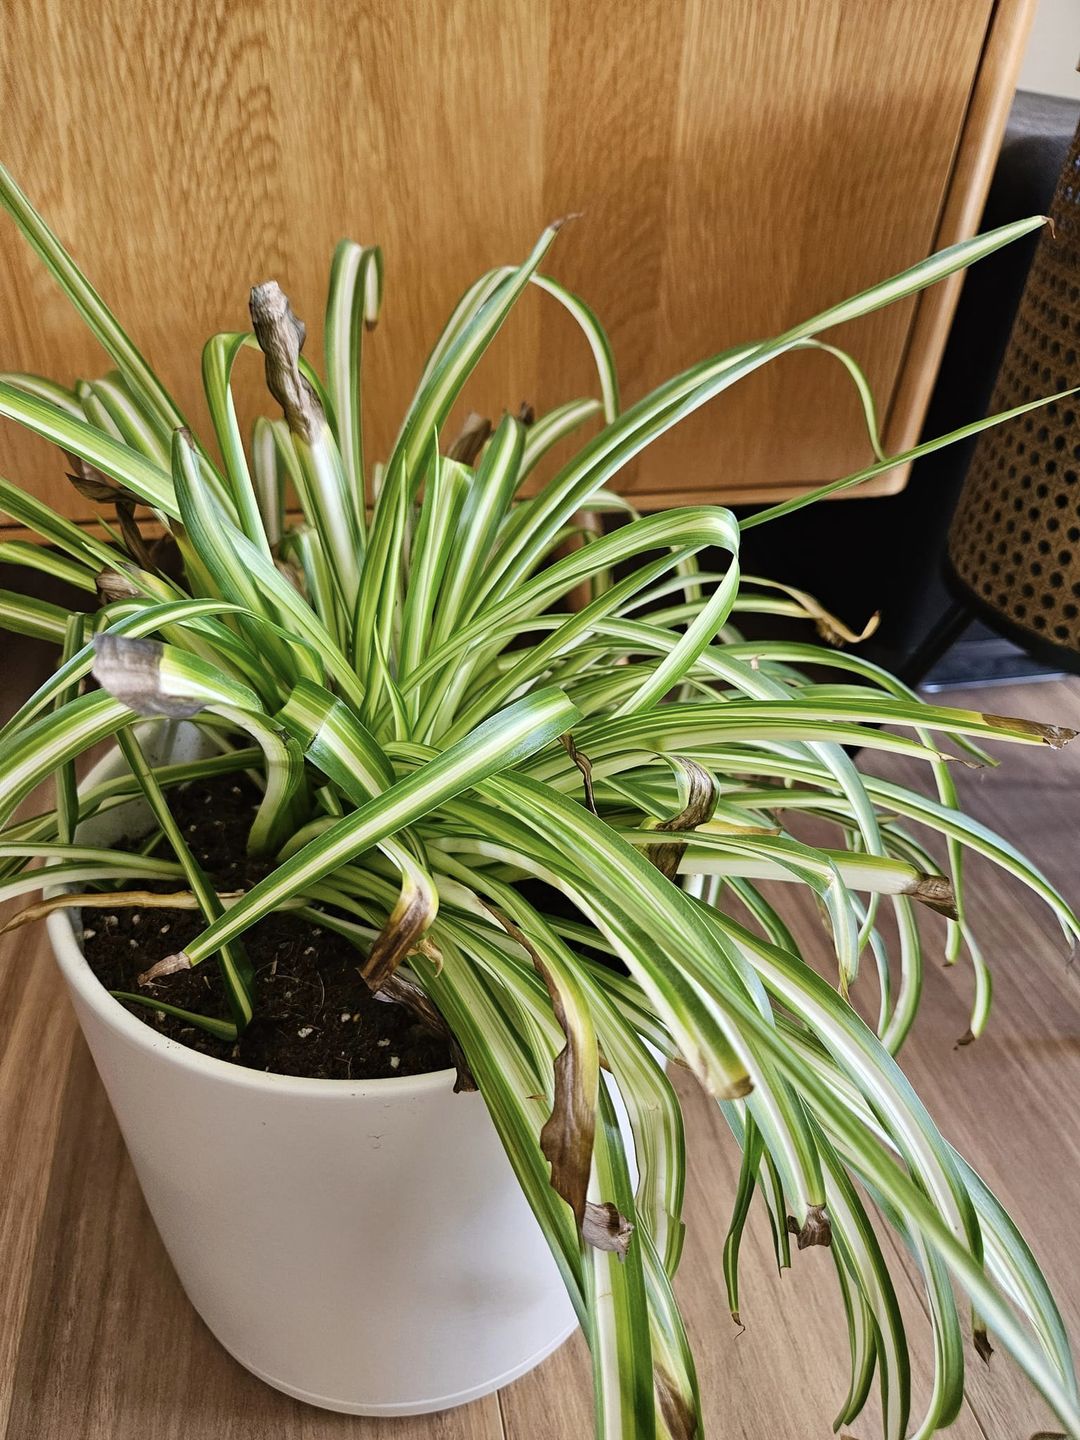 Why Does My Spider Plant Have Brown Tips